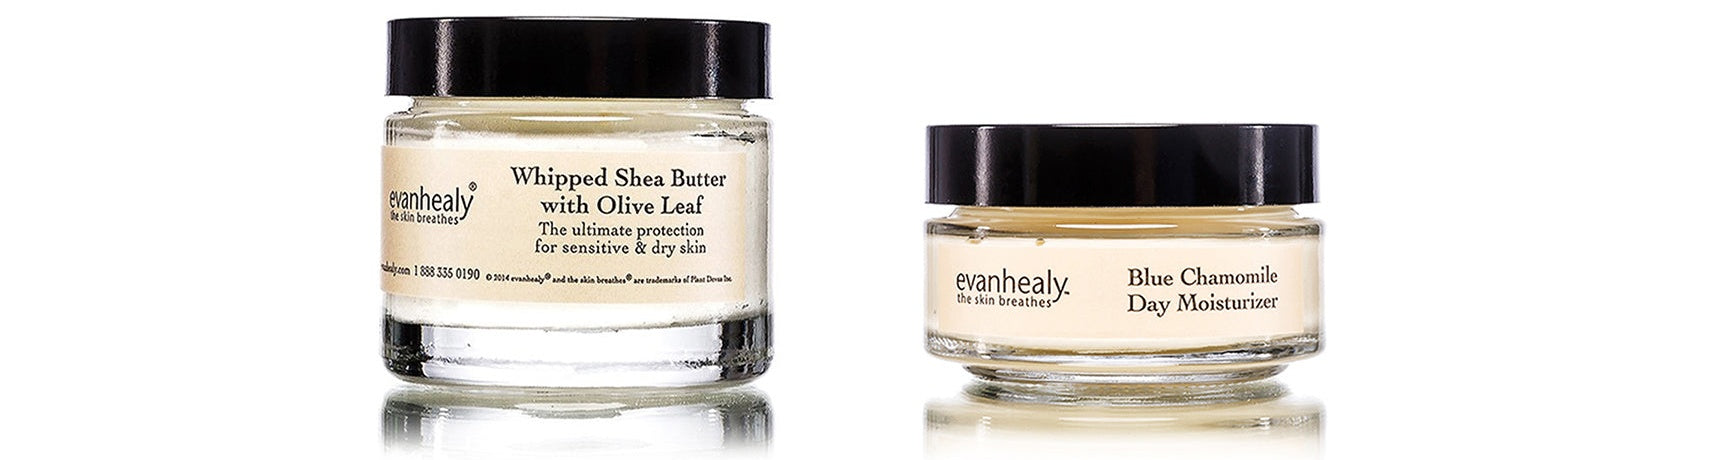 moisturizing facial shea butter and day moisturizer evanhealy